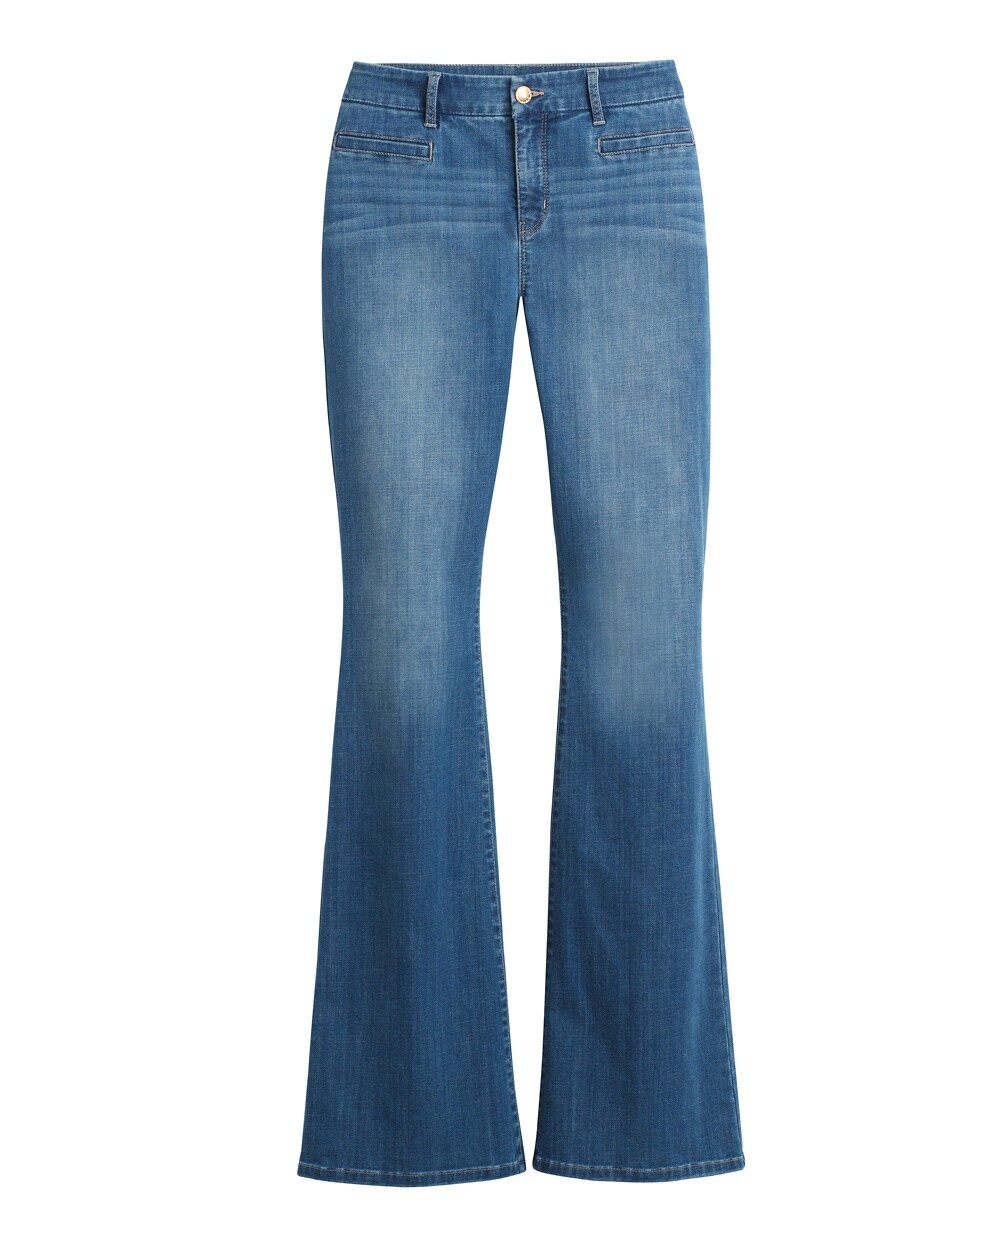 Girlfriend Flare Jeans - Chico's